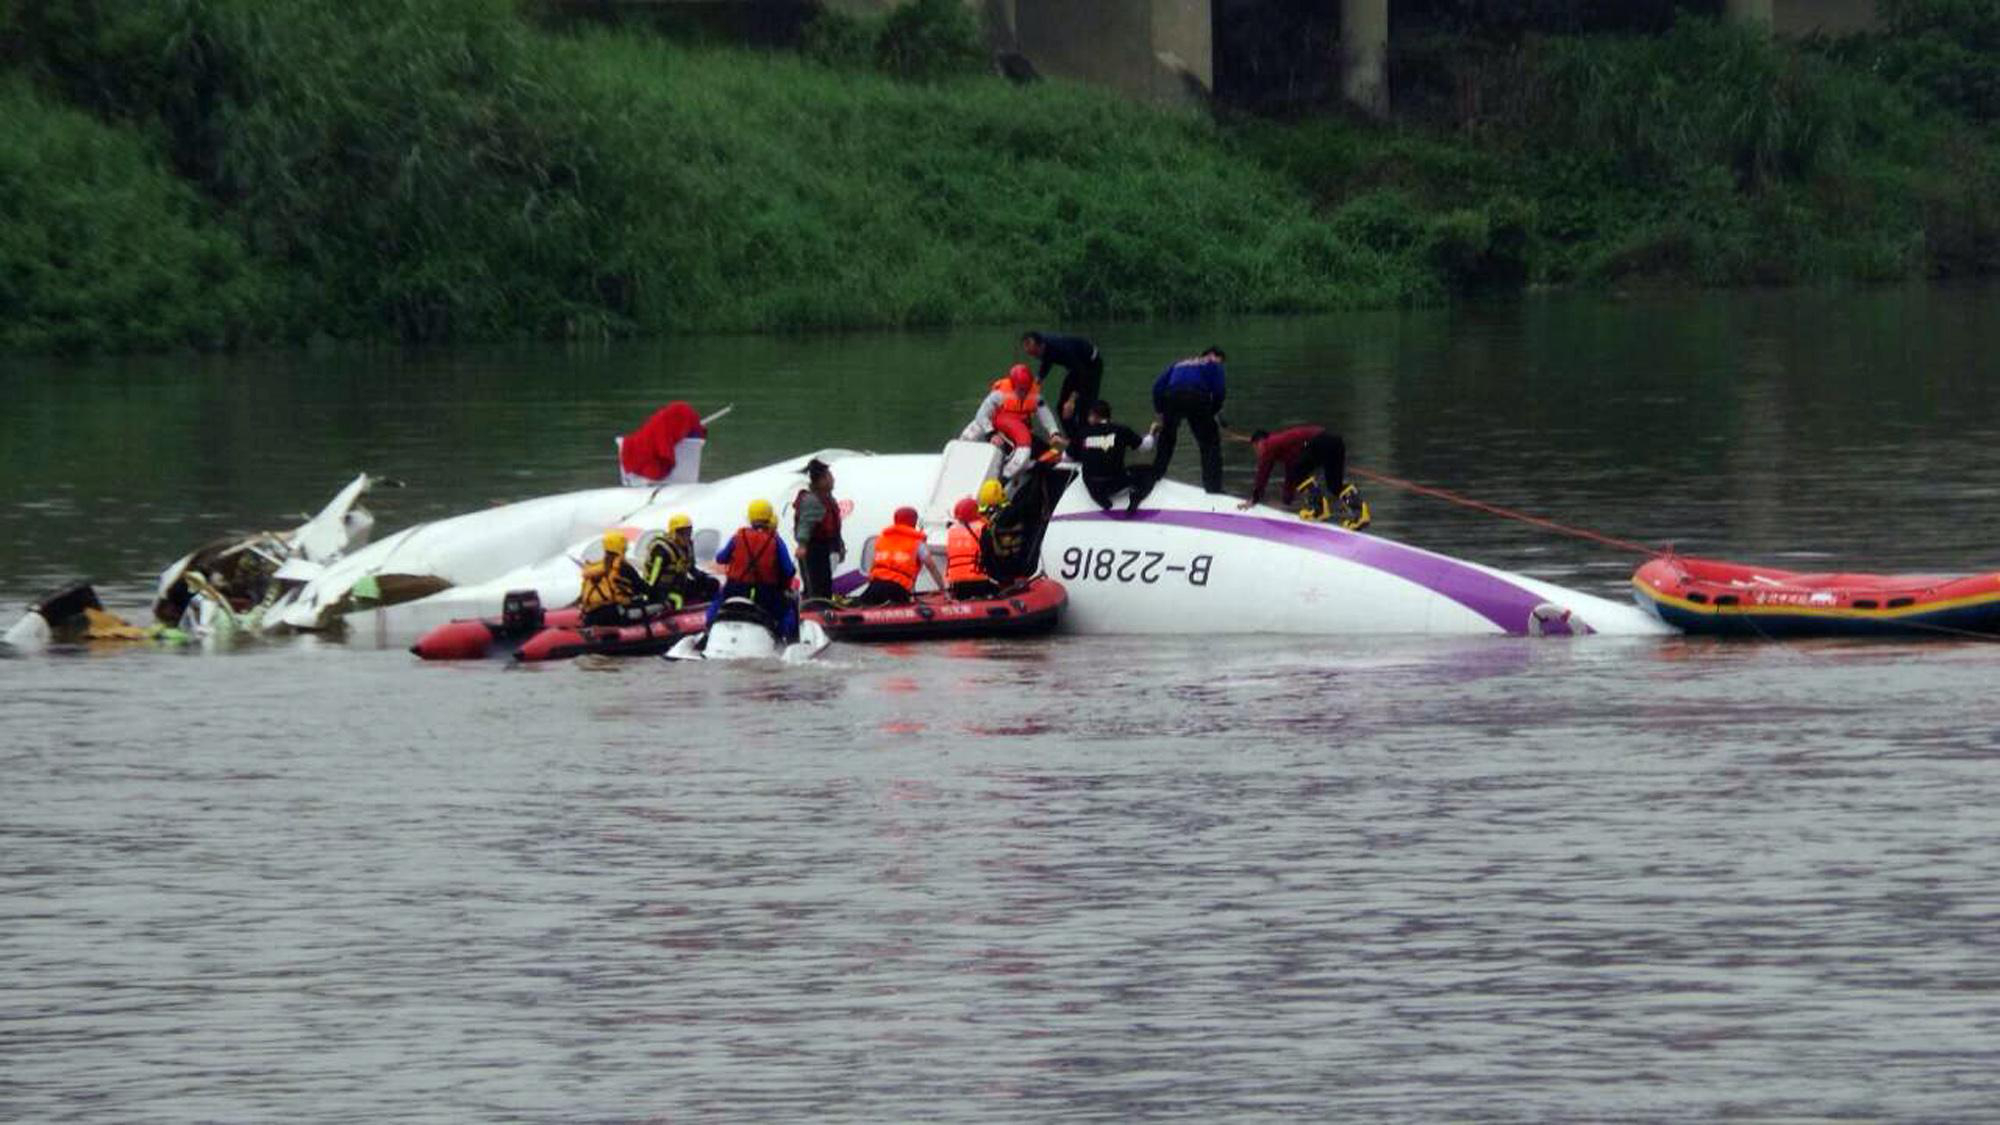 Rescuers work at the site of the plane accident in Taipei. Image Source: Xinhua/IANS